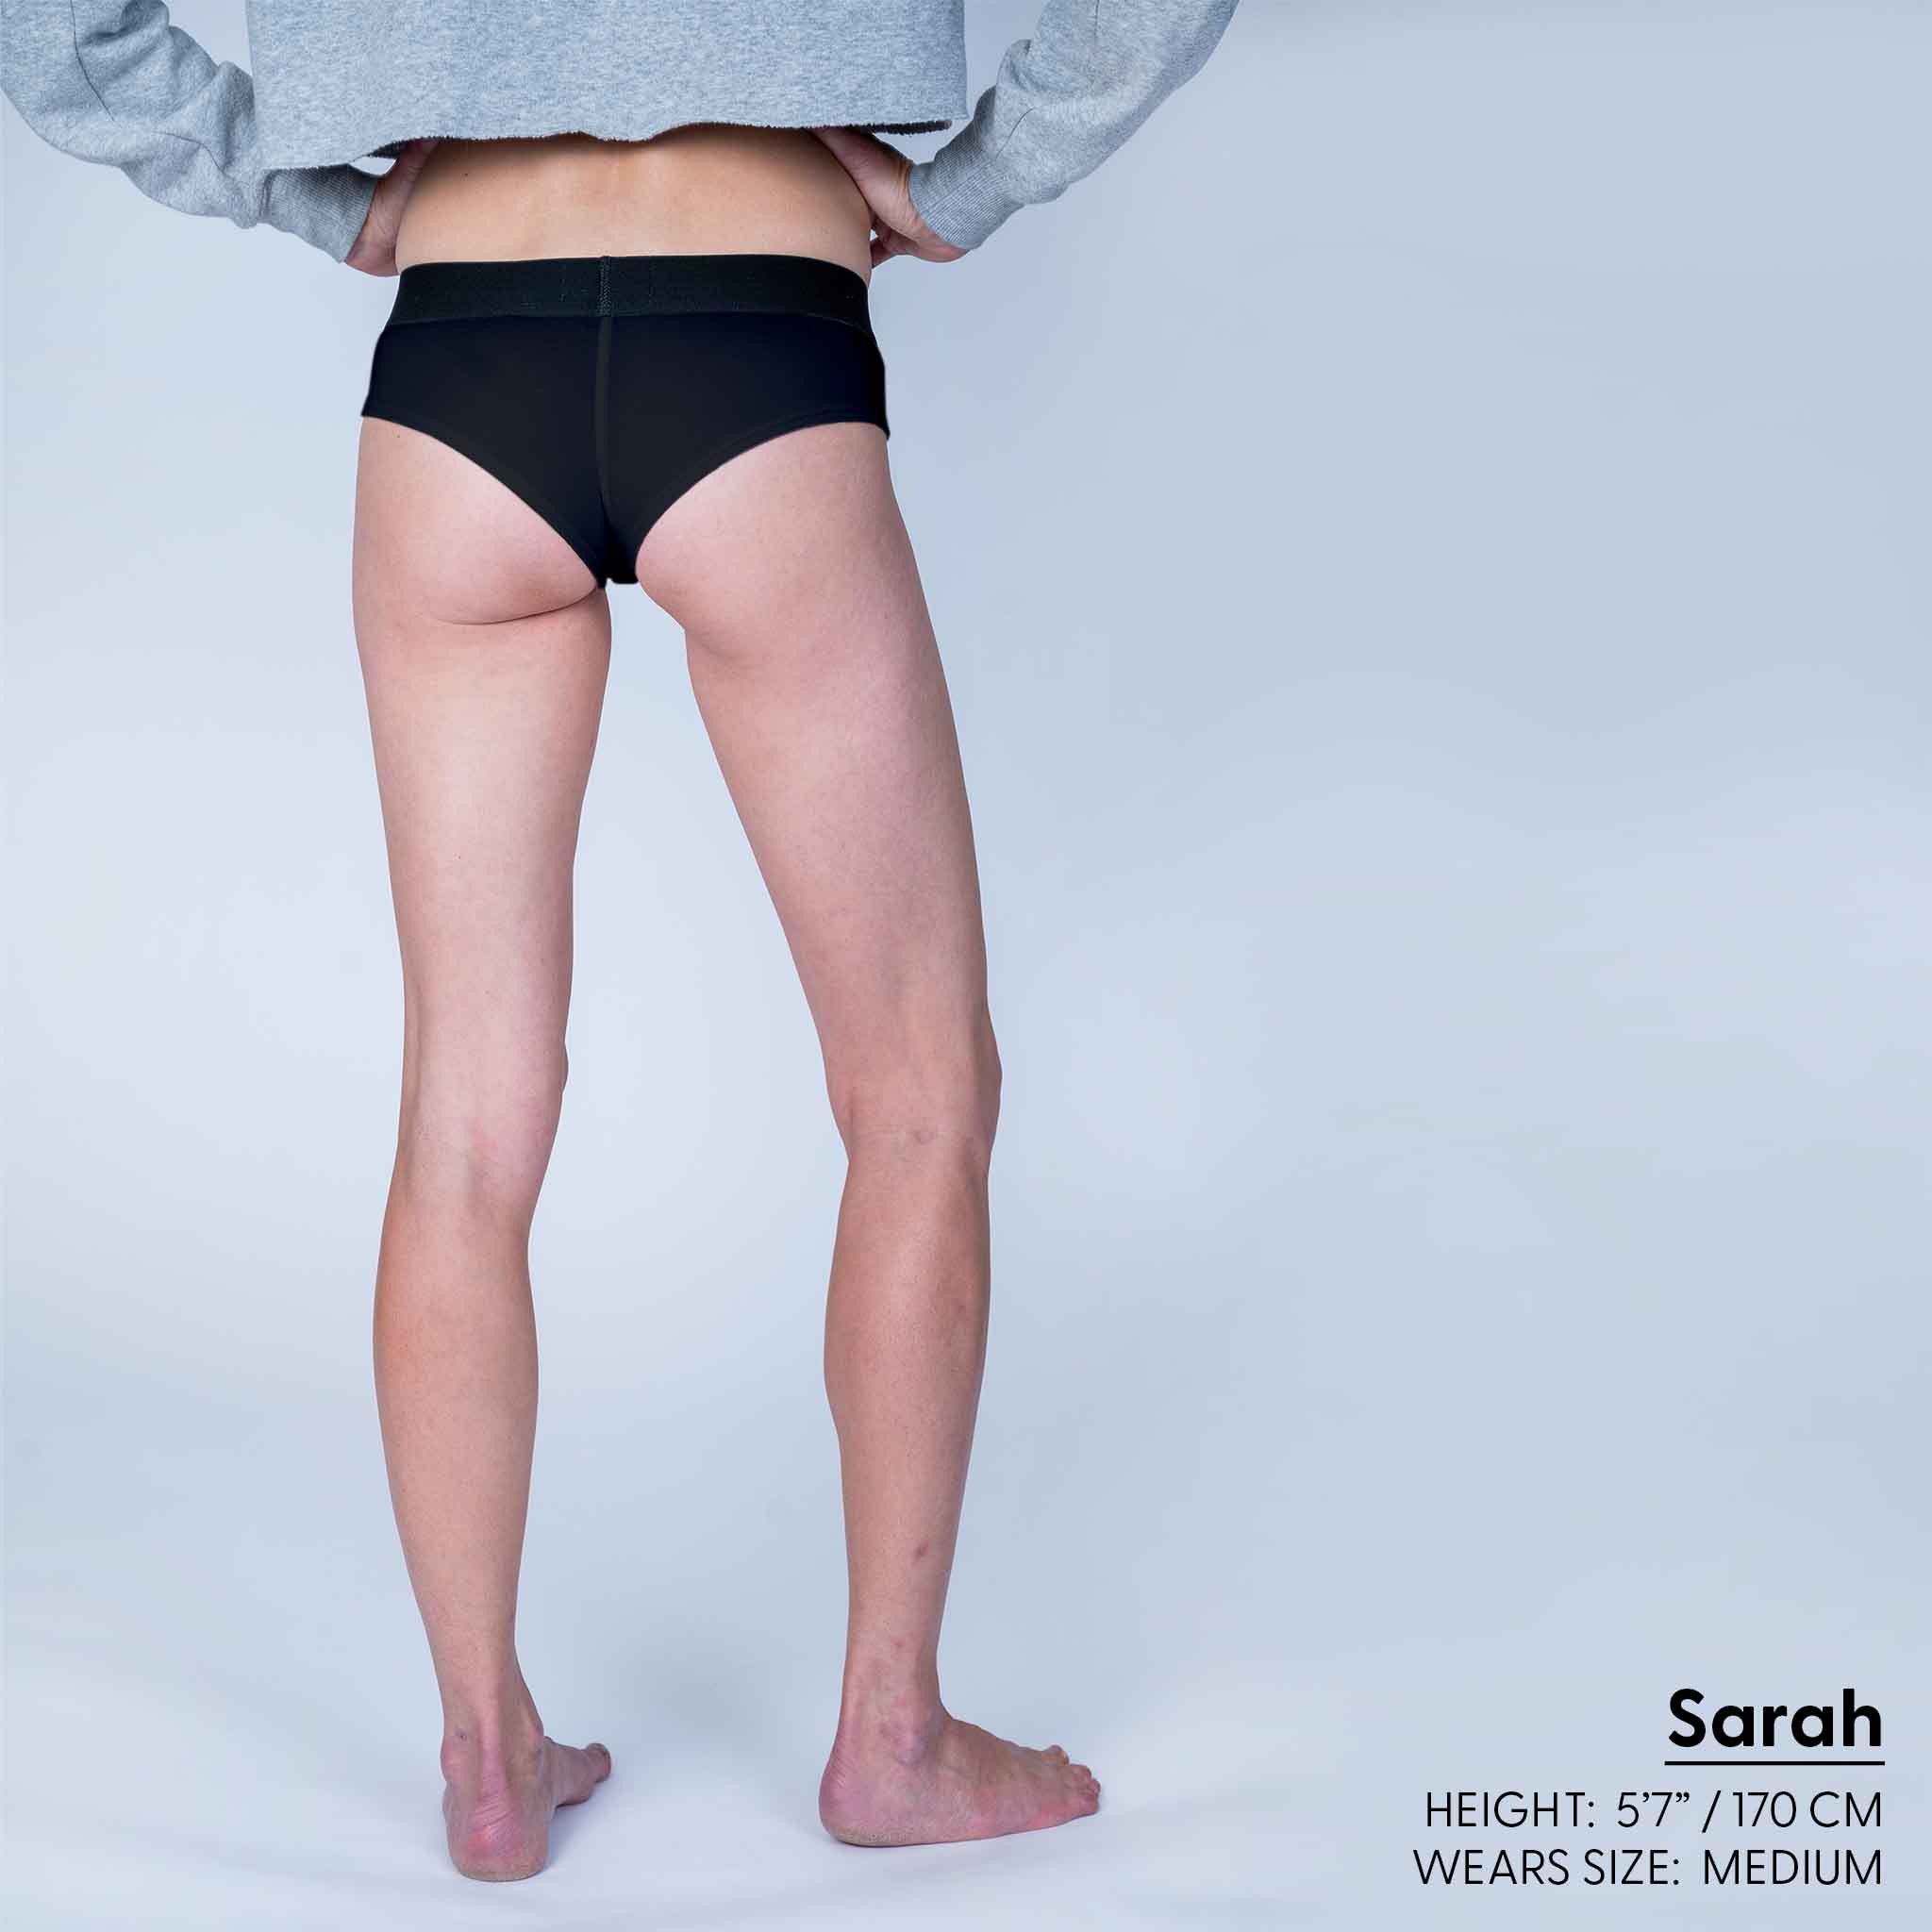 Here For The Candy | Cheeky Underwear